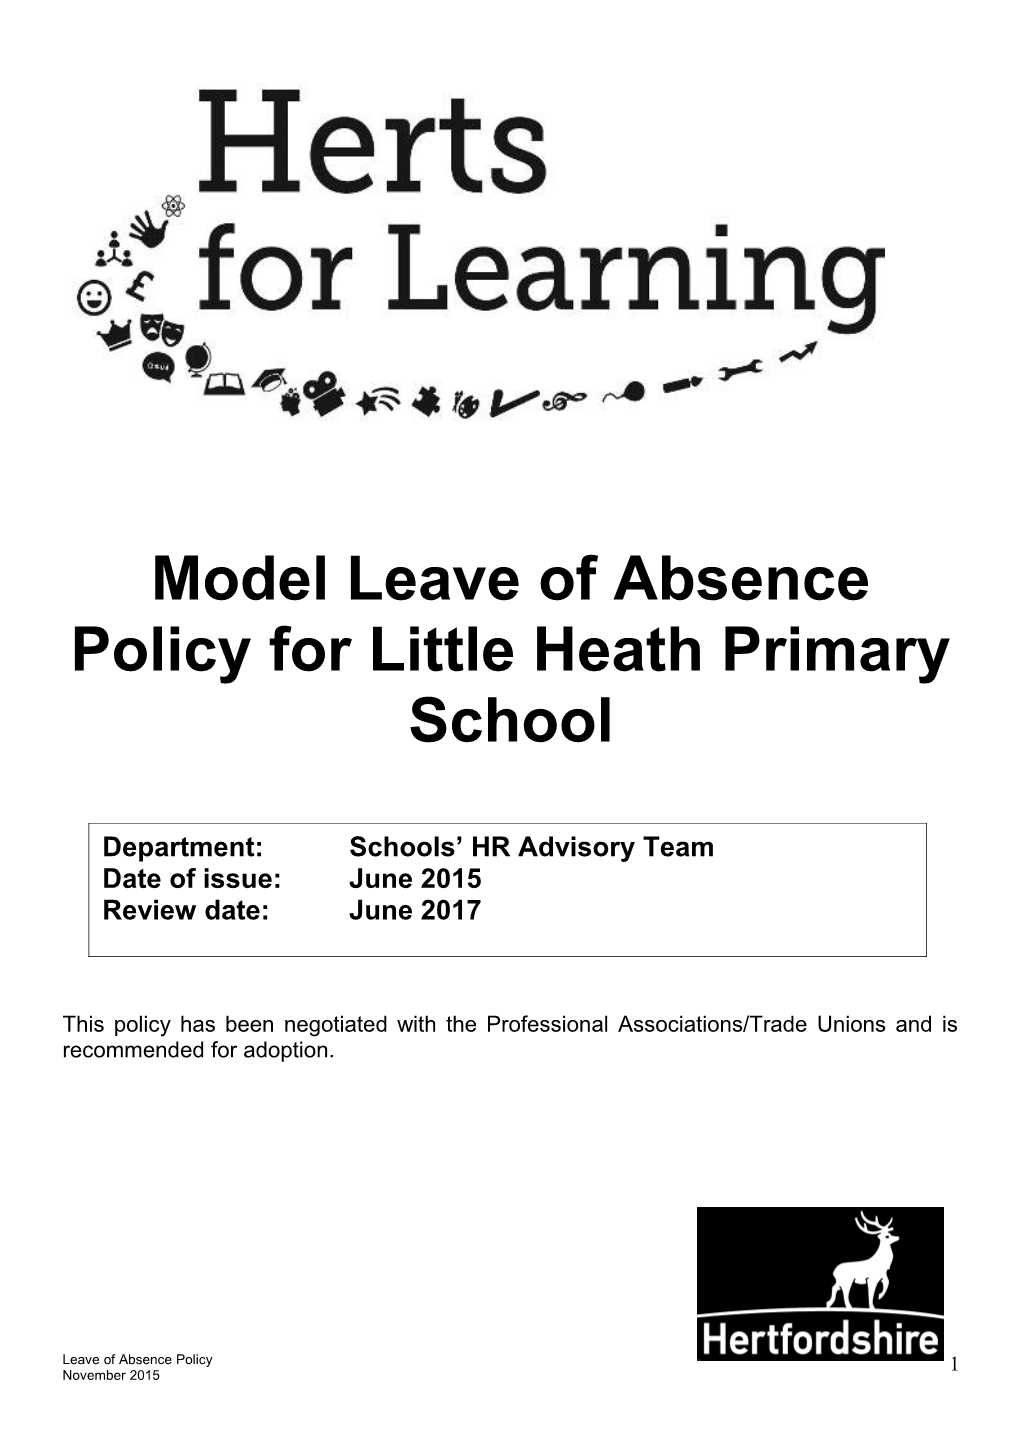 Model Leave of Absence Policy for Little Heath Primary School